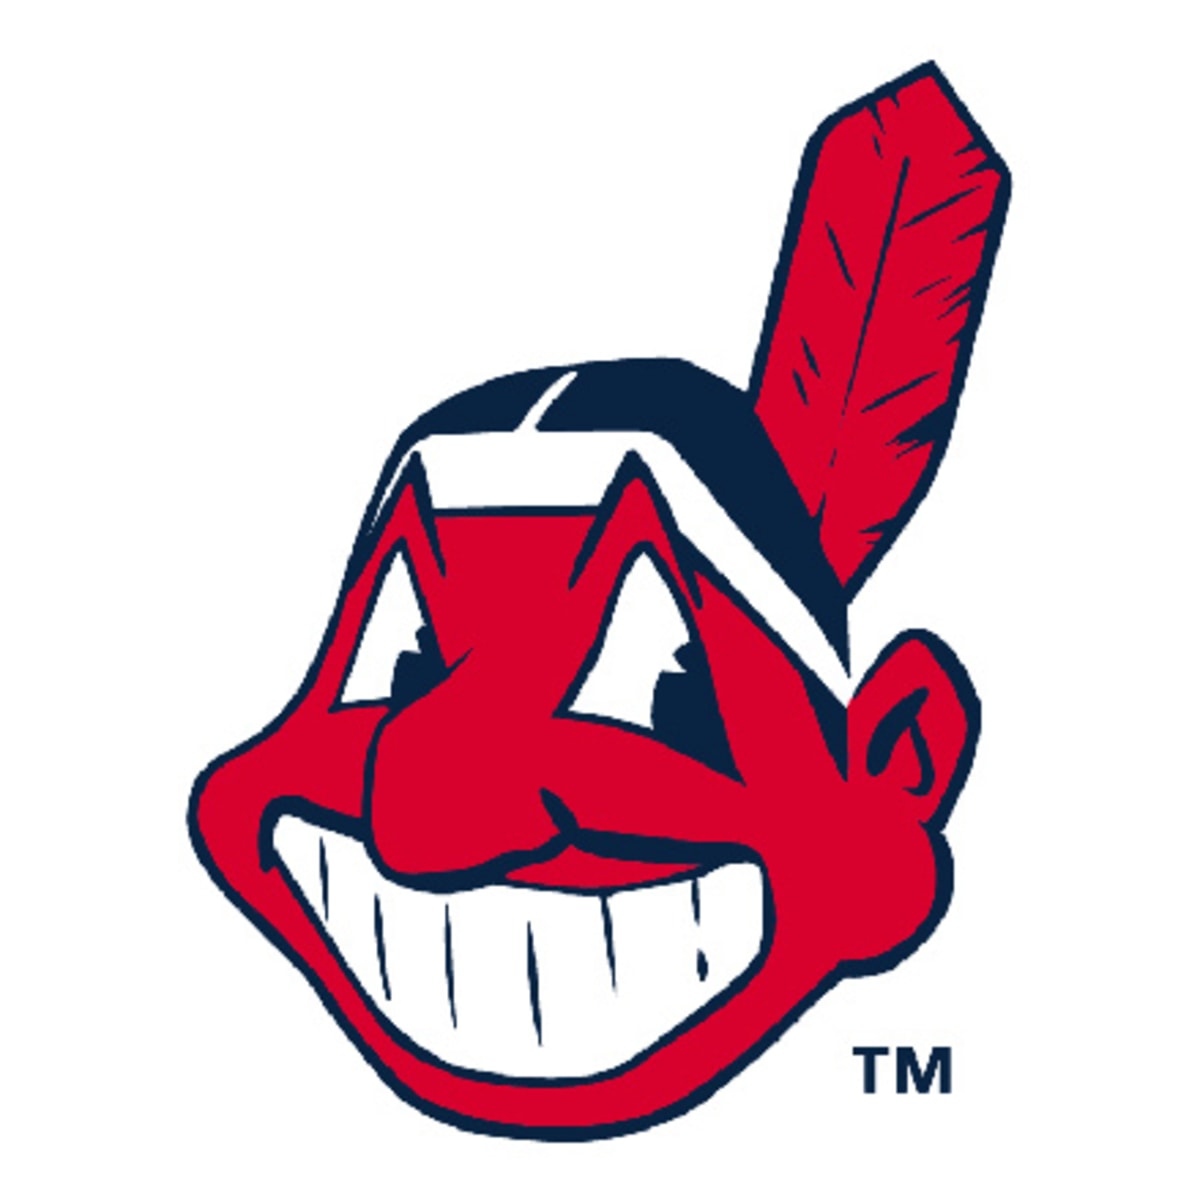 How did Cleveland's baseball team end up with the name 'Indians